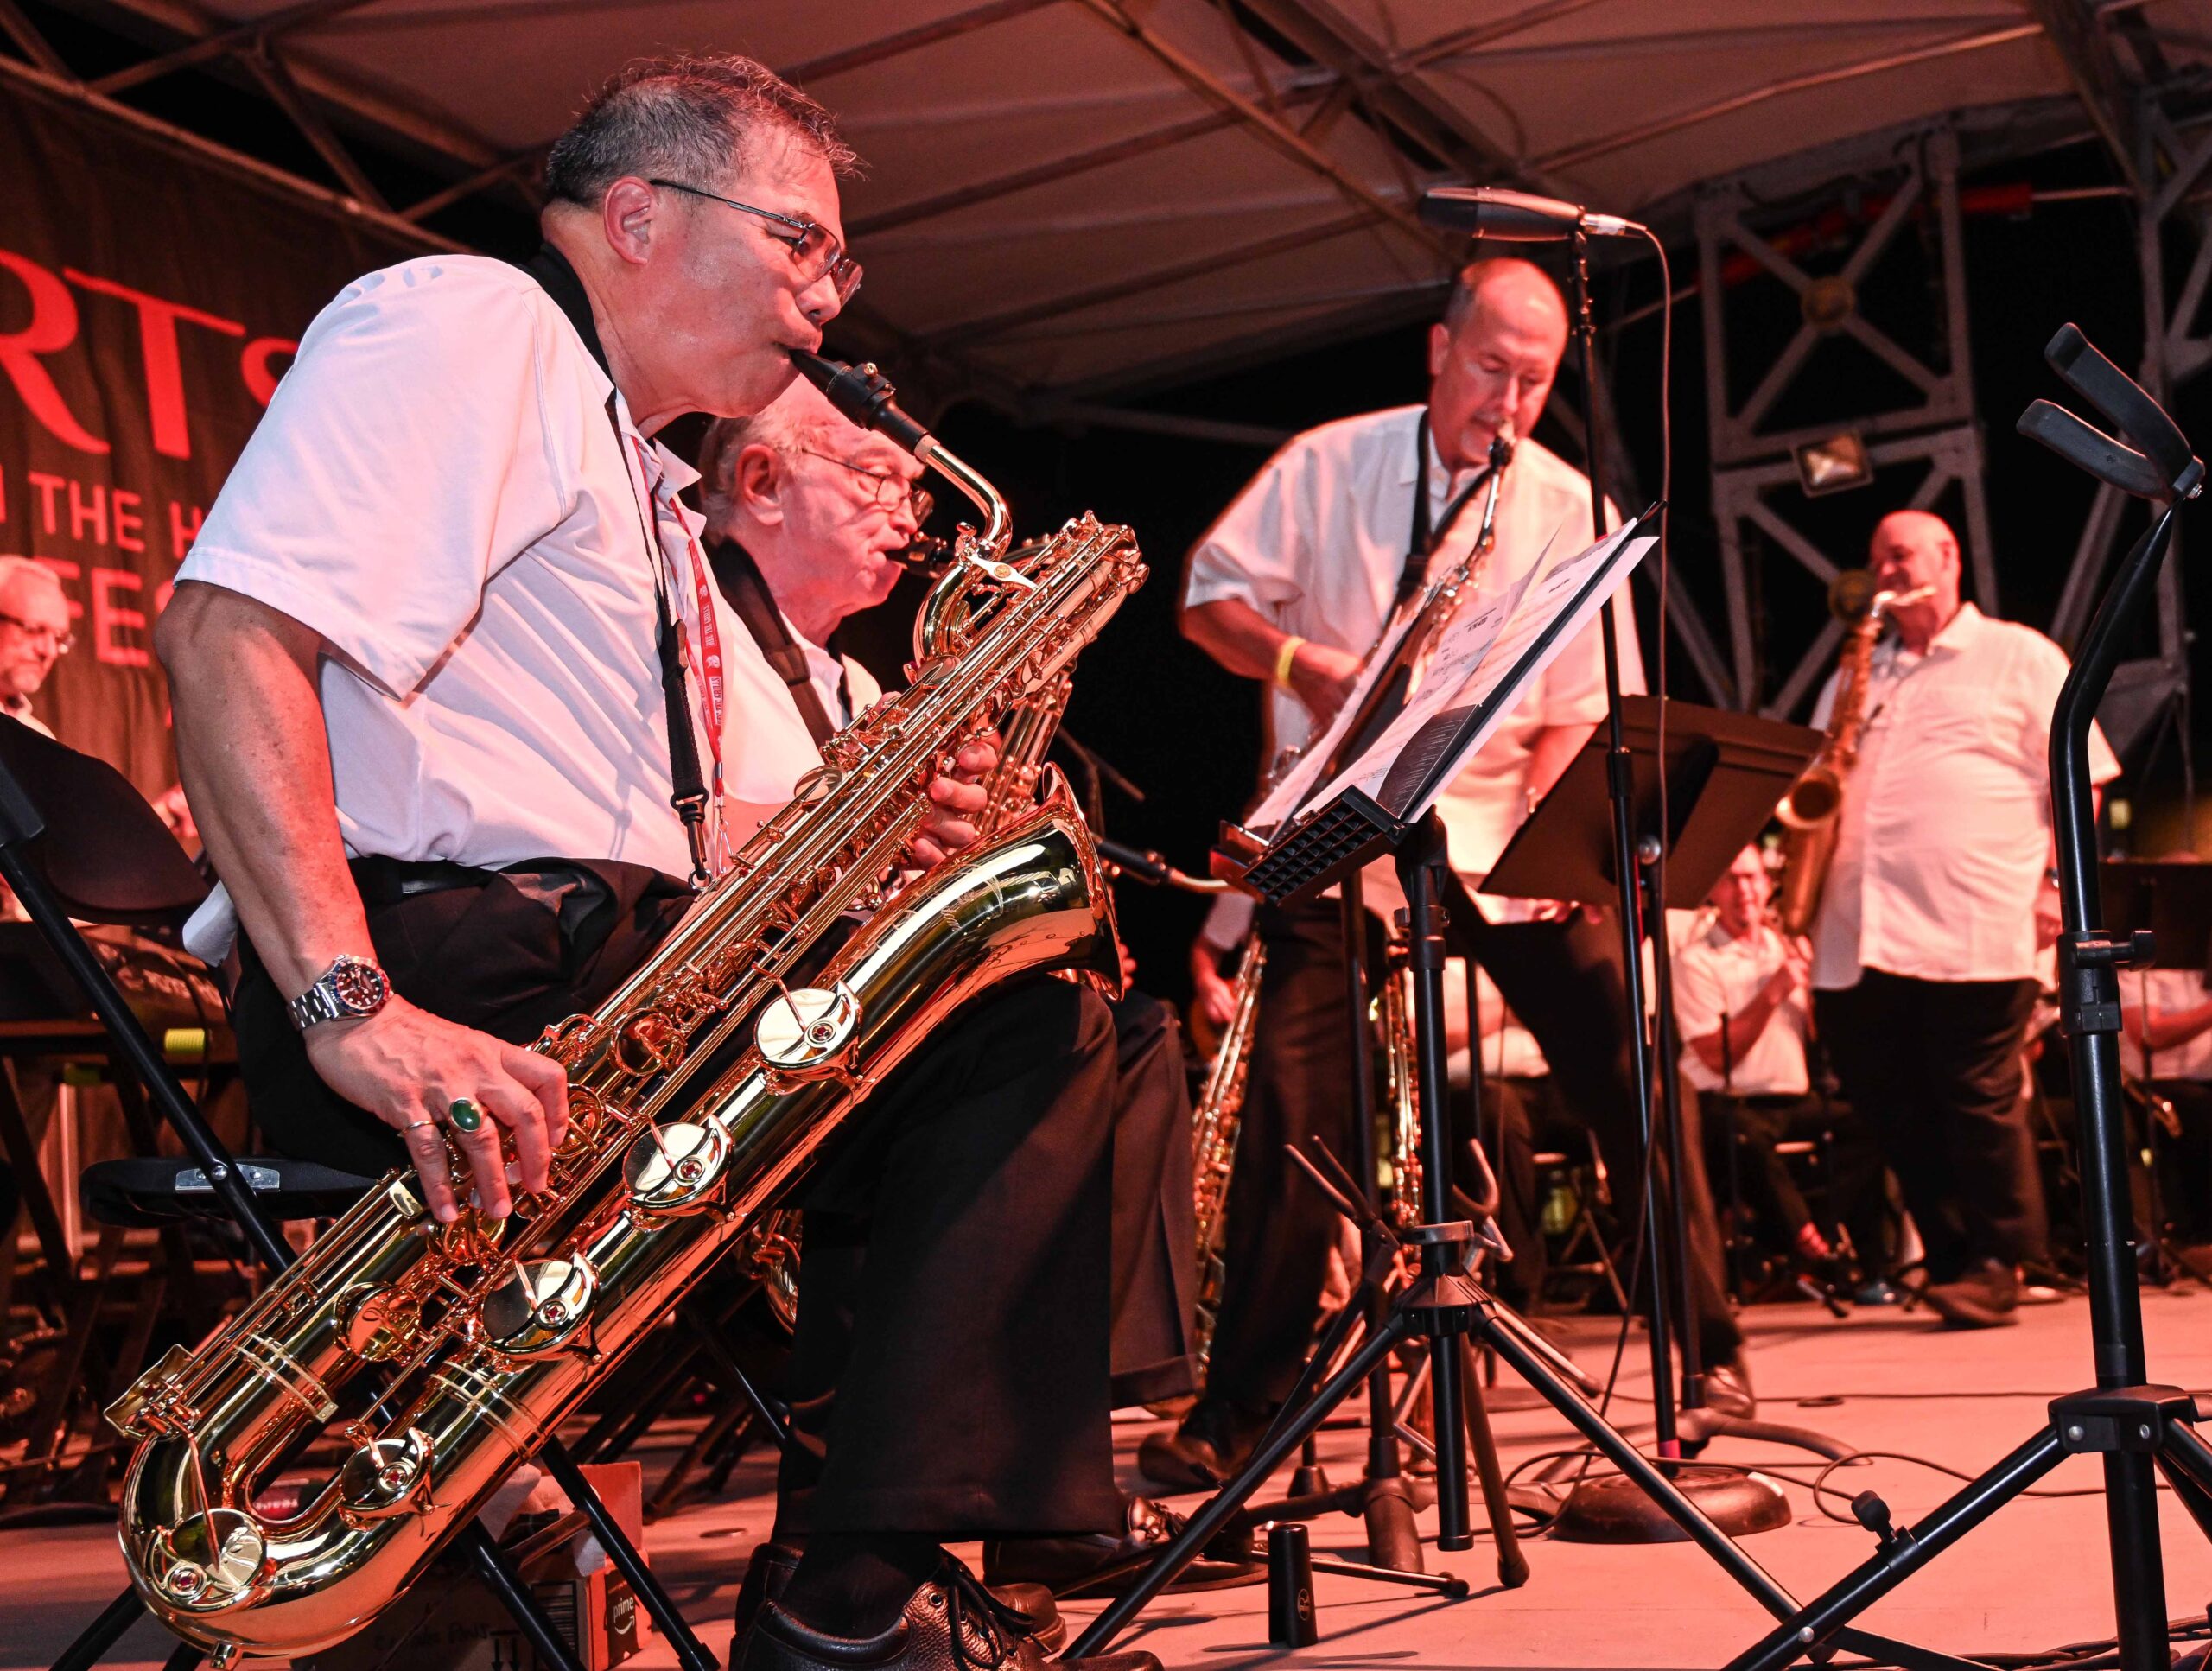 The Wayne Hoey Big Band featuring Russell Joel Brown